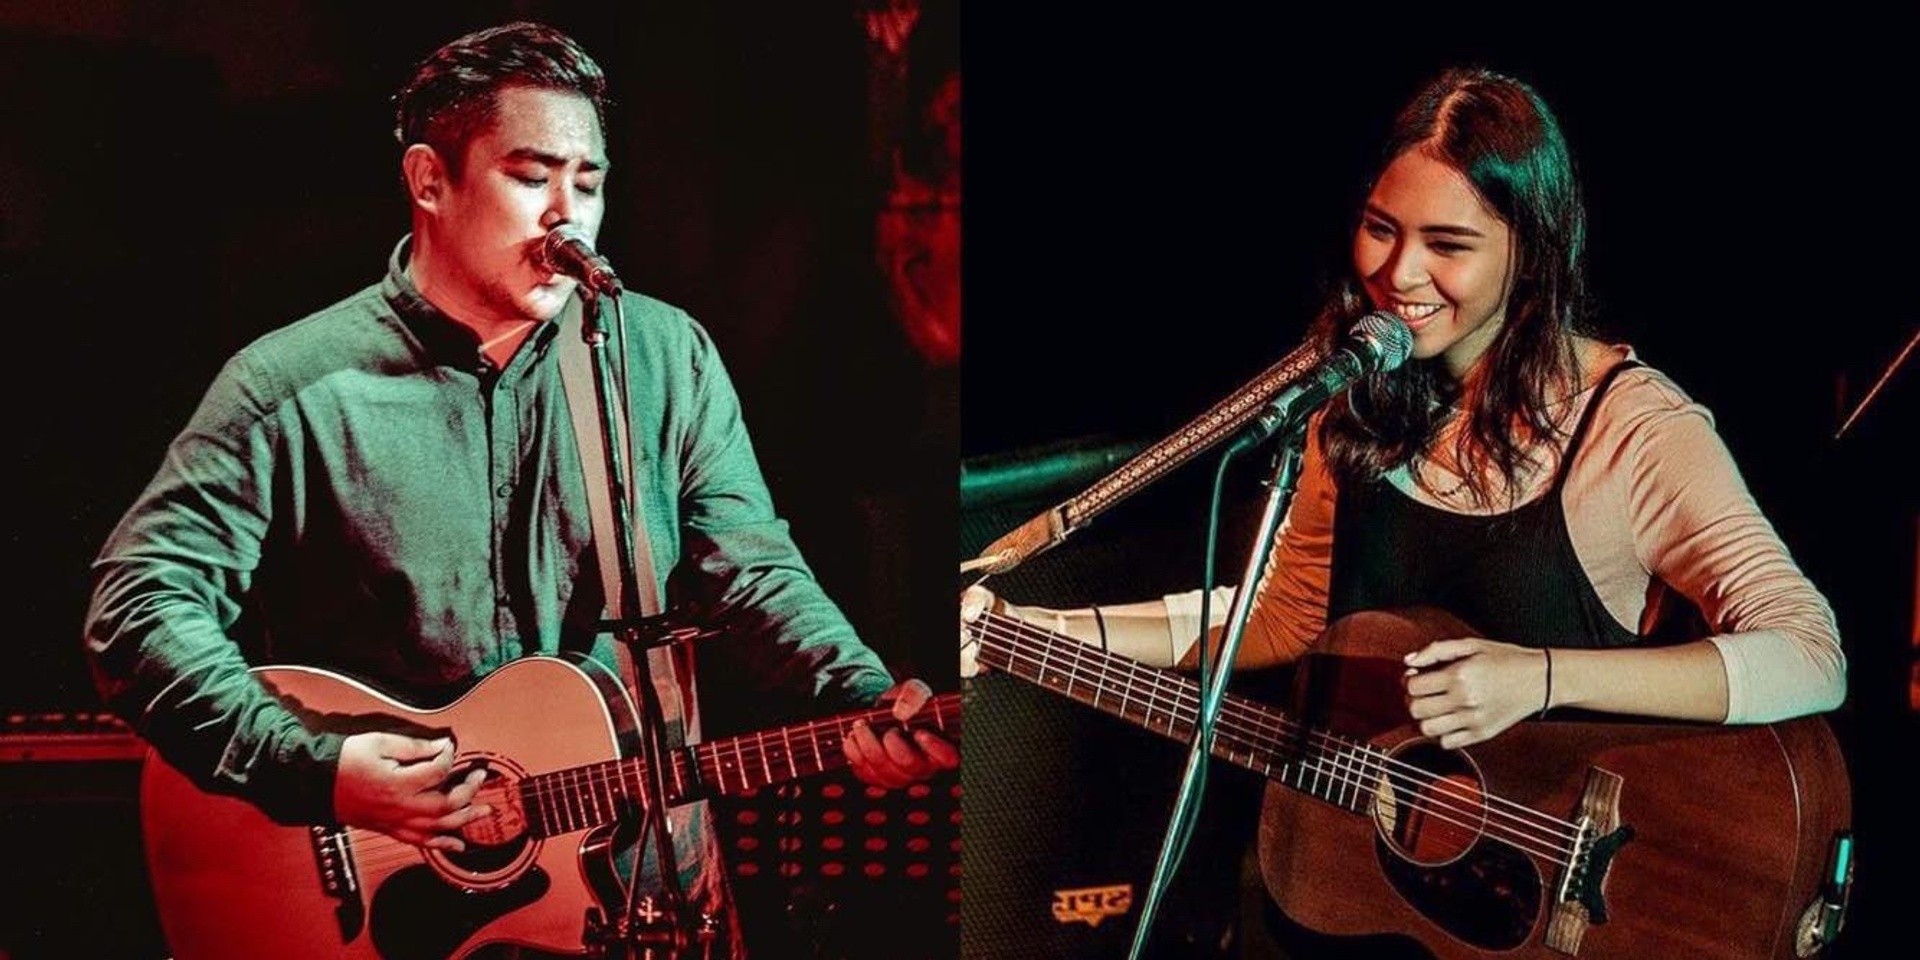 Clara Benin and December Avenue team up for a special Valentine's show